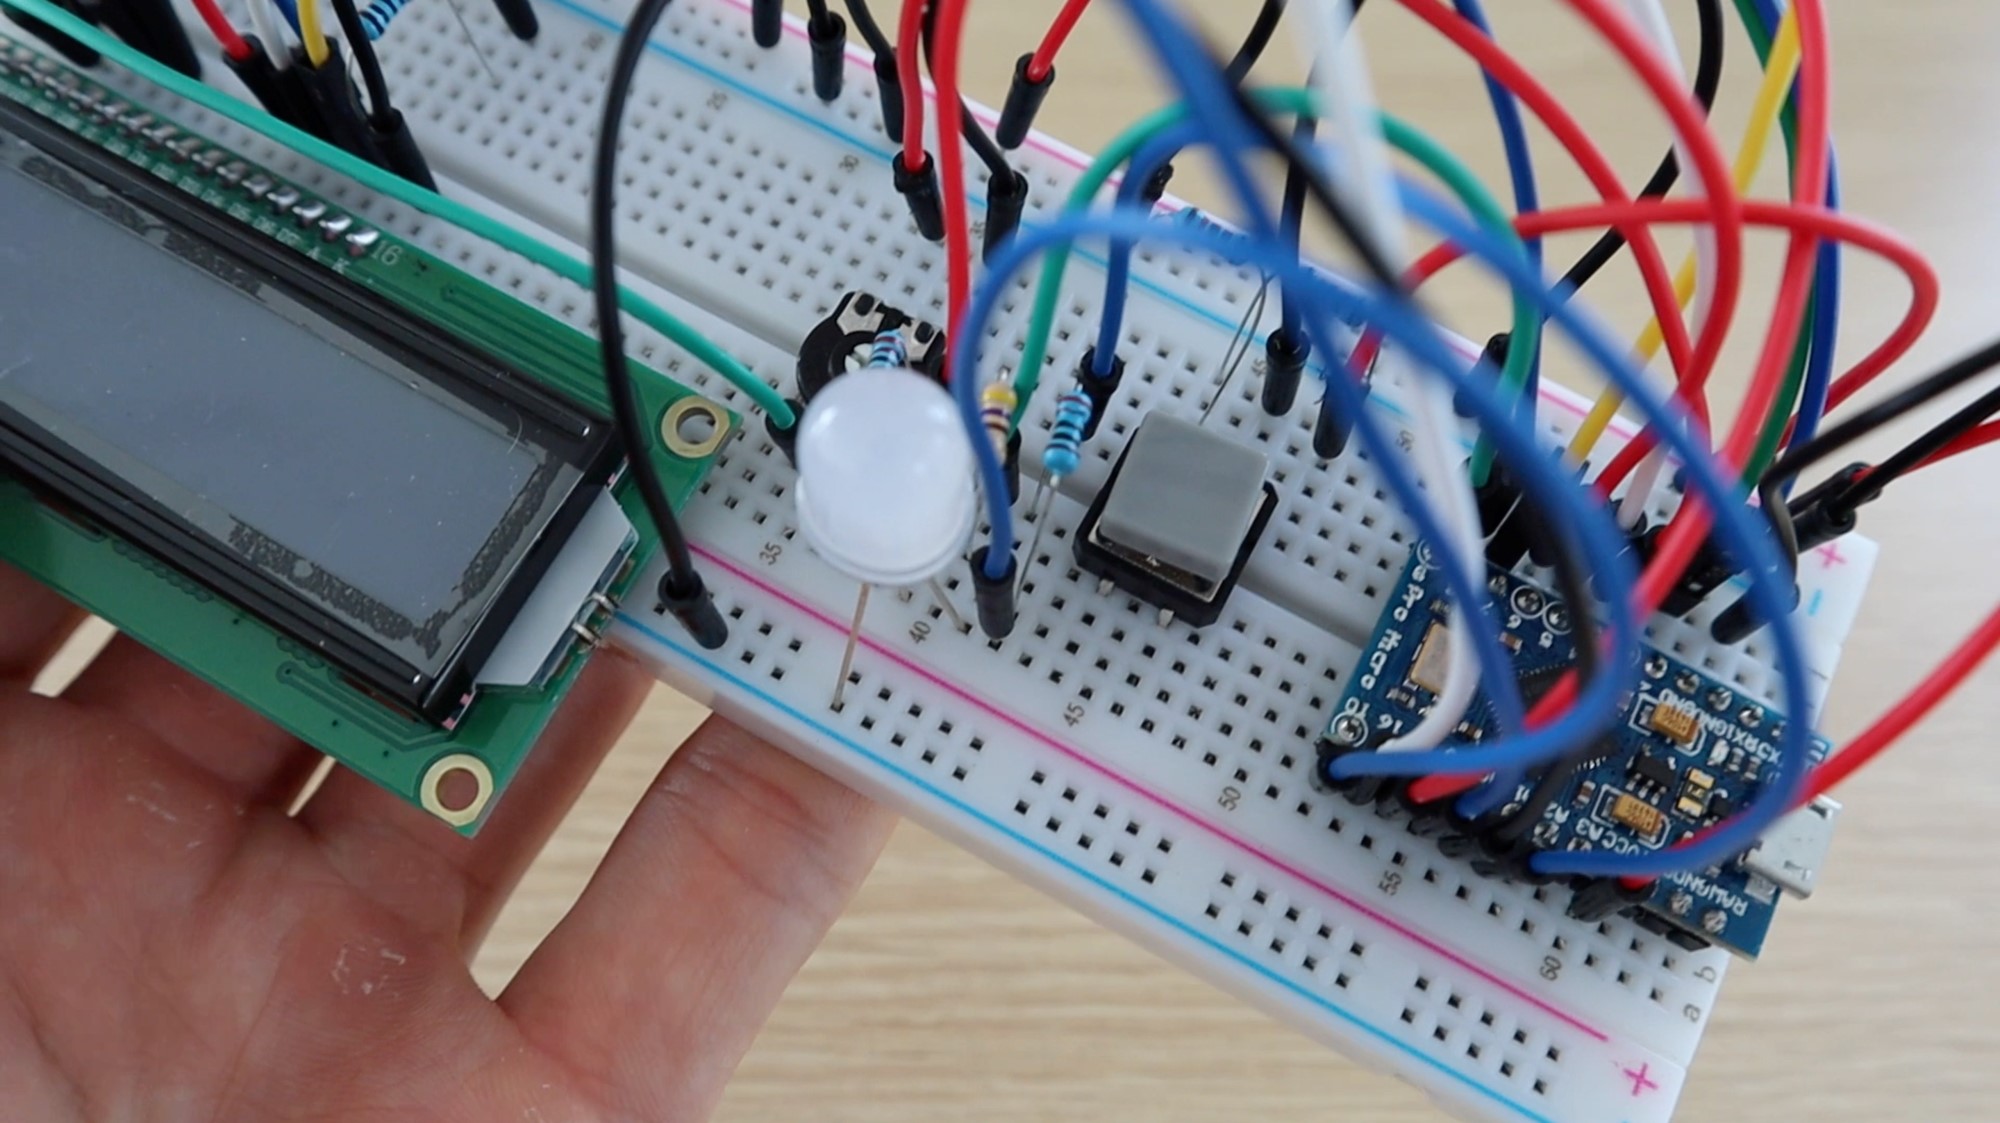 RGB LED and Pushbutton On Breadboard